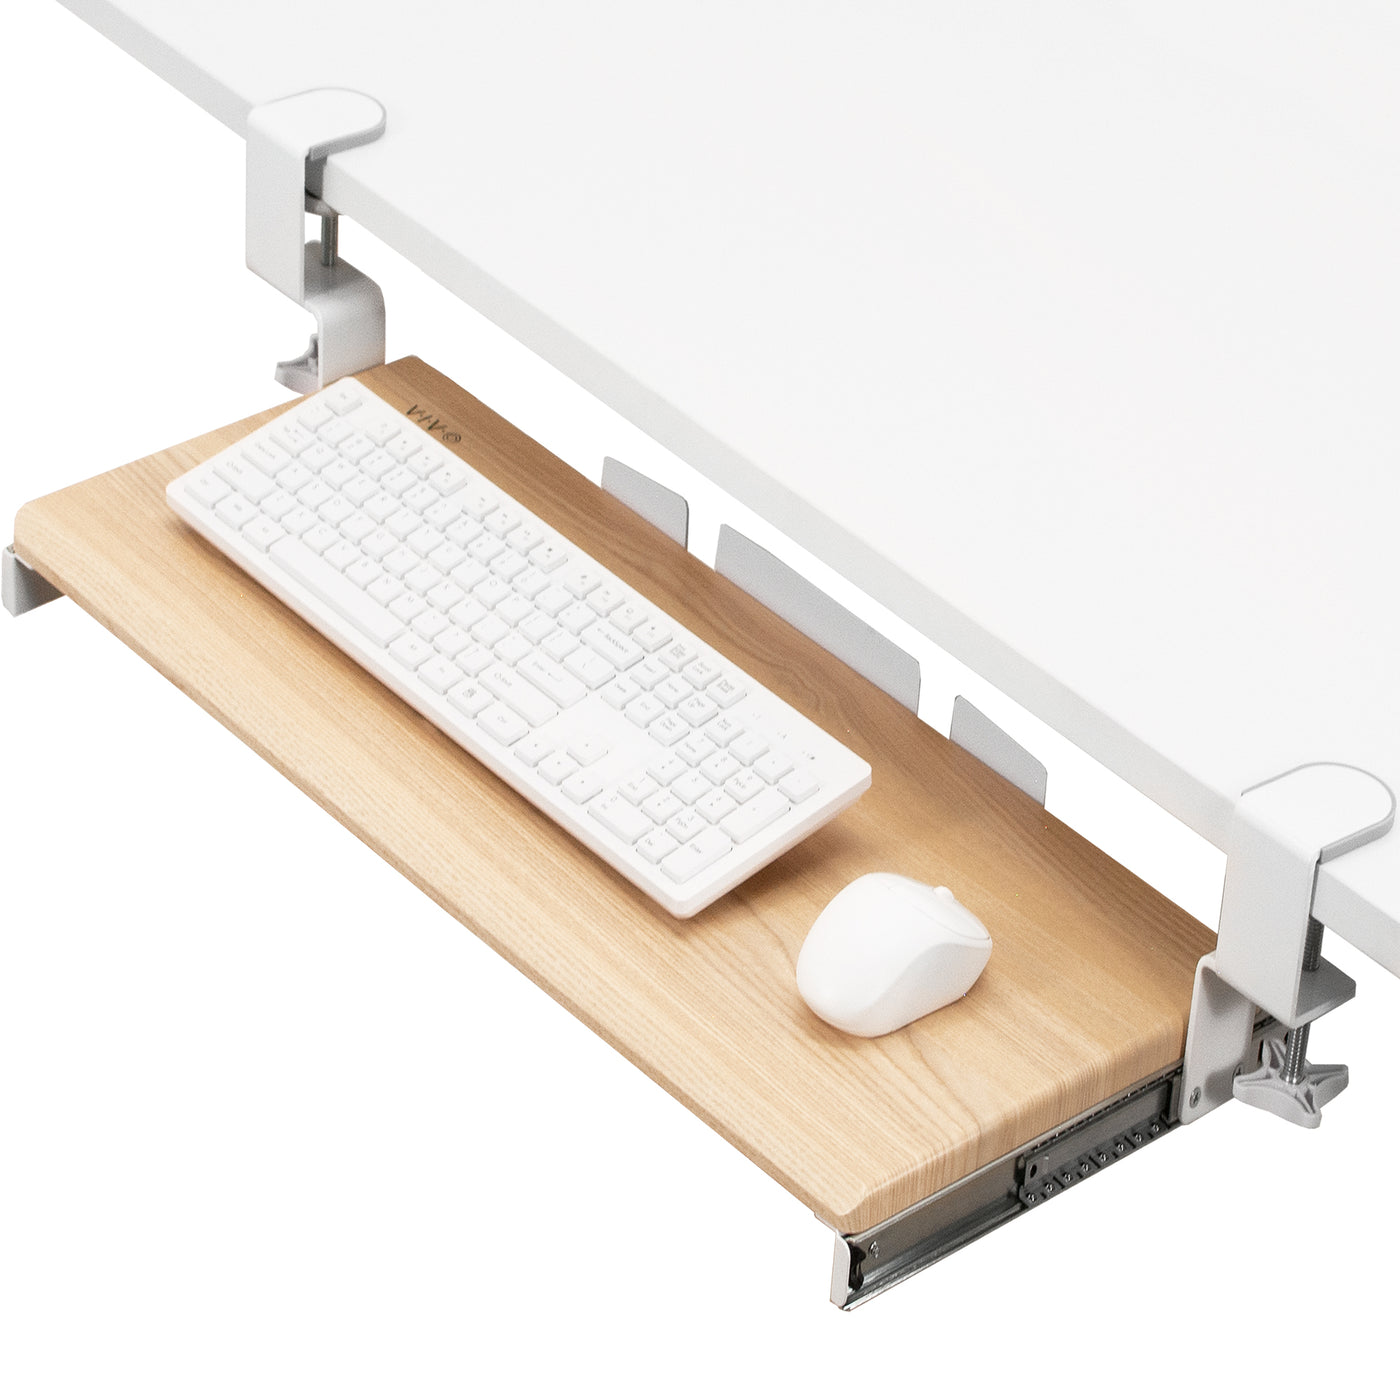 Clamp-on Desk Cup Holder – VIVO - desk solutions, screen mounting, and more